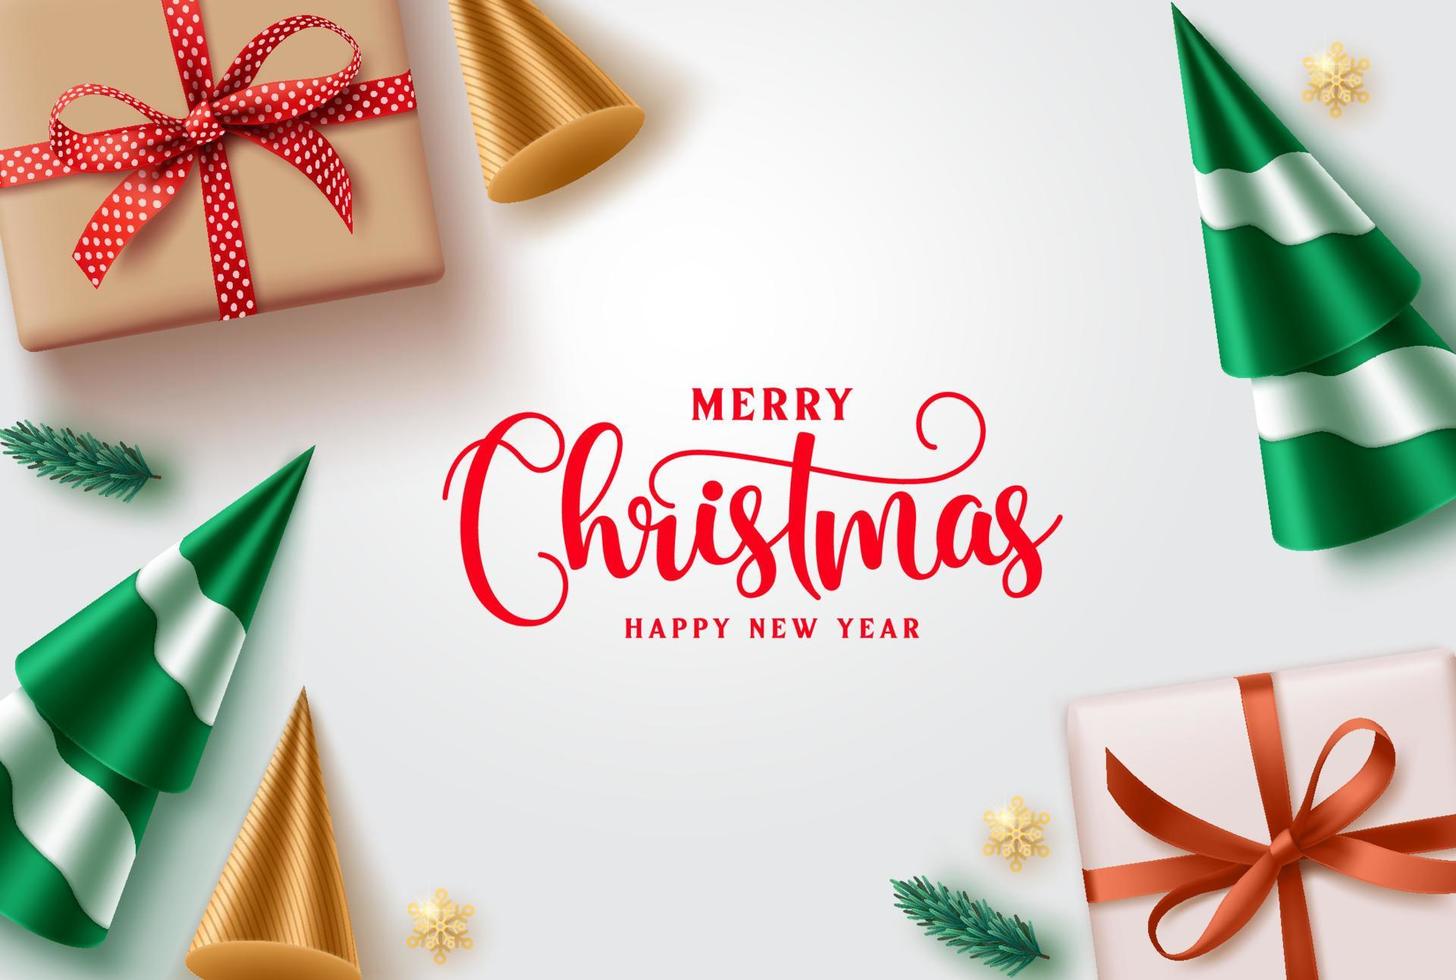 Merry christmas vector background design. Christmas greeting text with ornaments like gift box, cone and xmas tree elements for holiday season card decoration. Vector illustration.